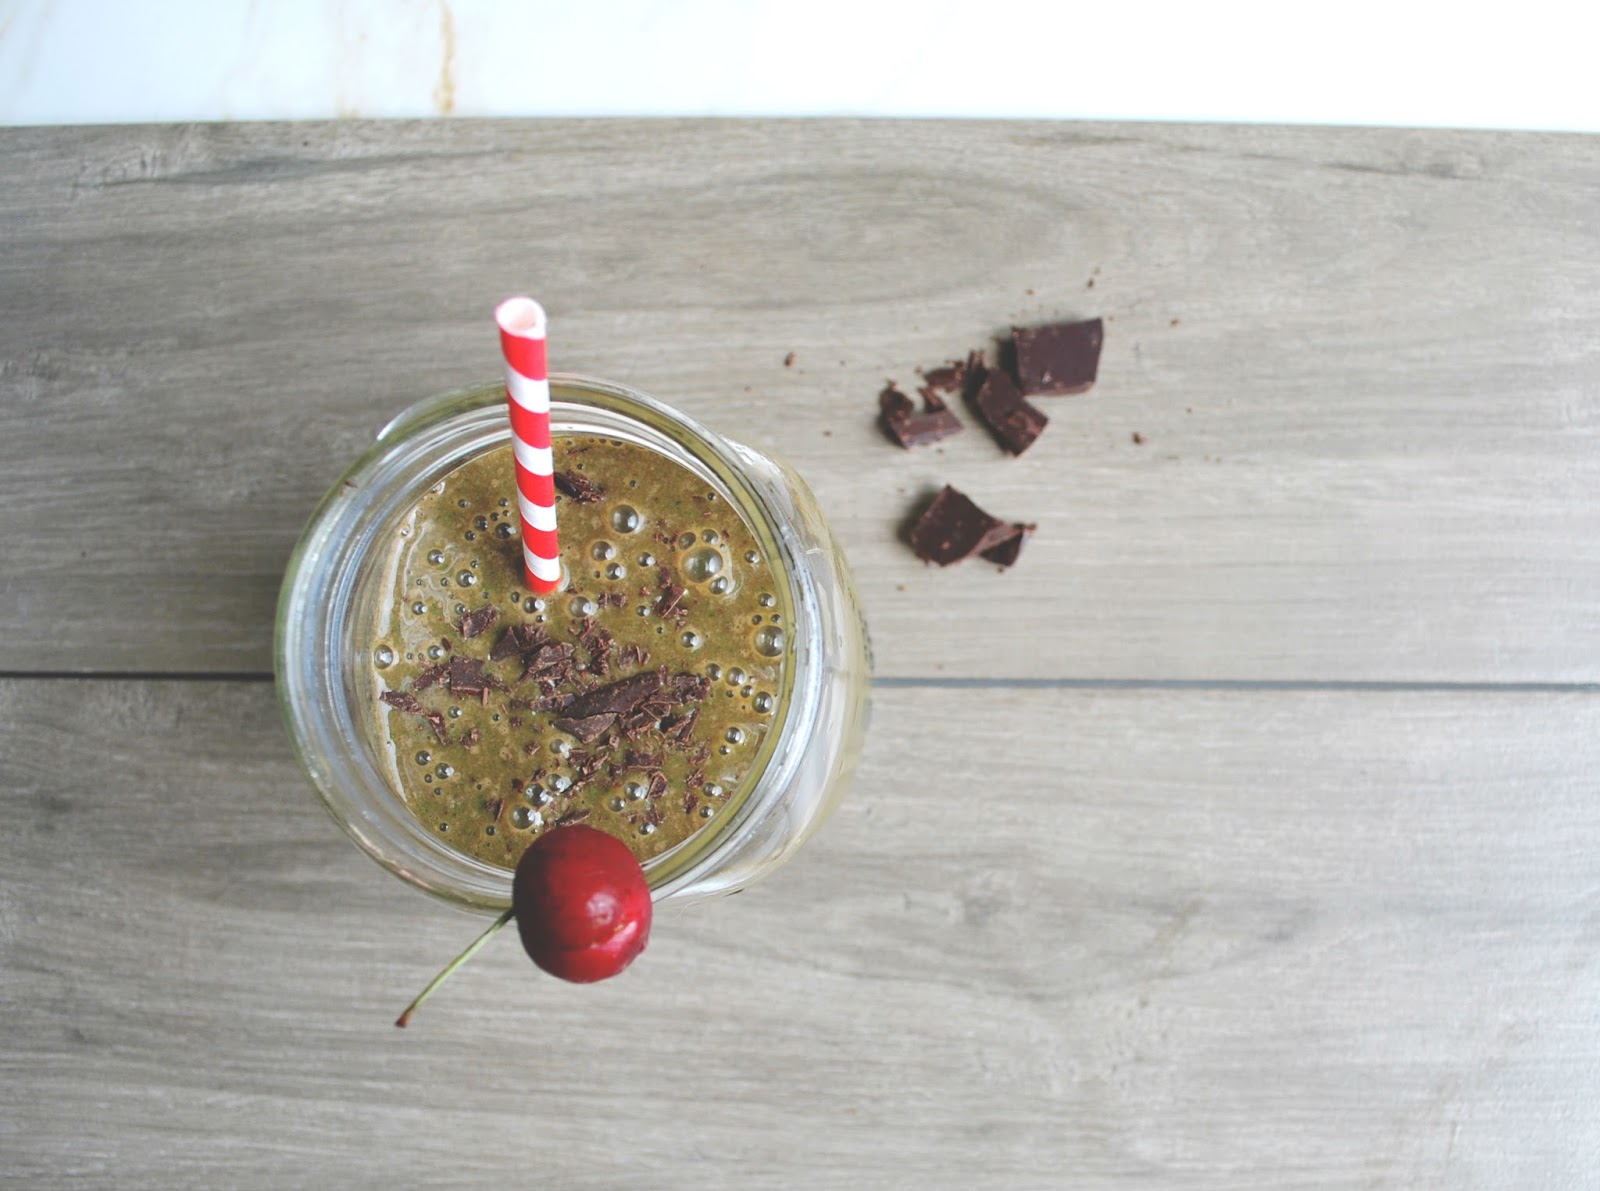 Chocolate-Covered Cherry Smoothie